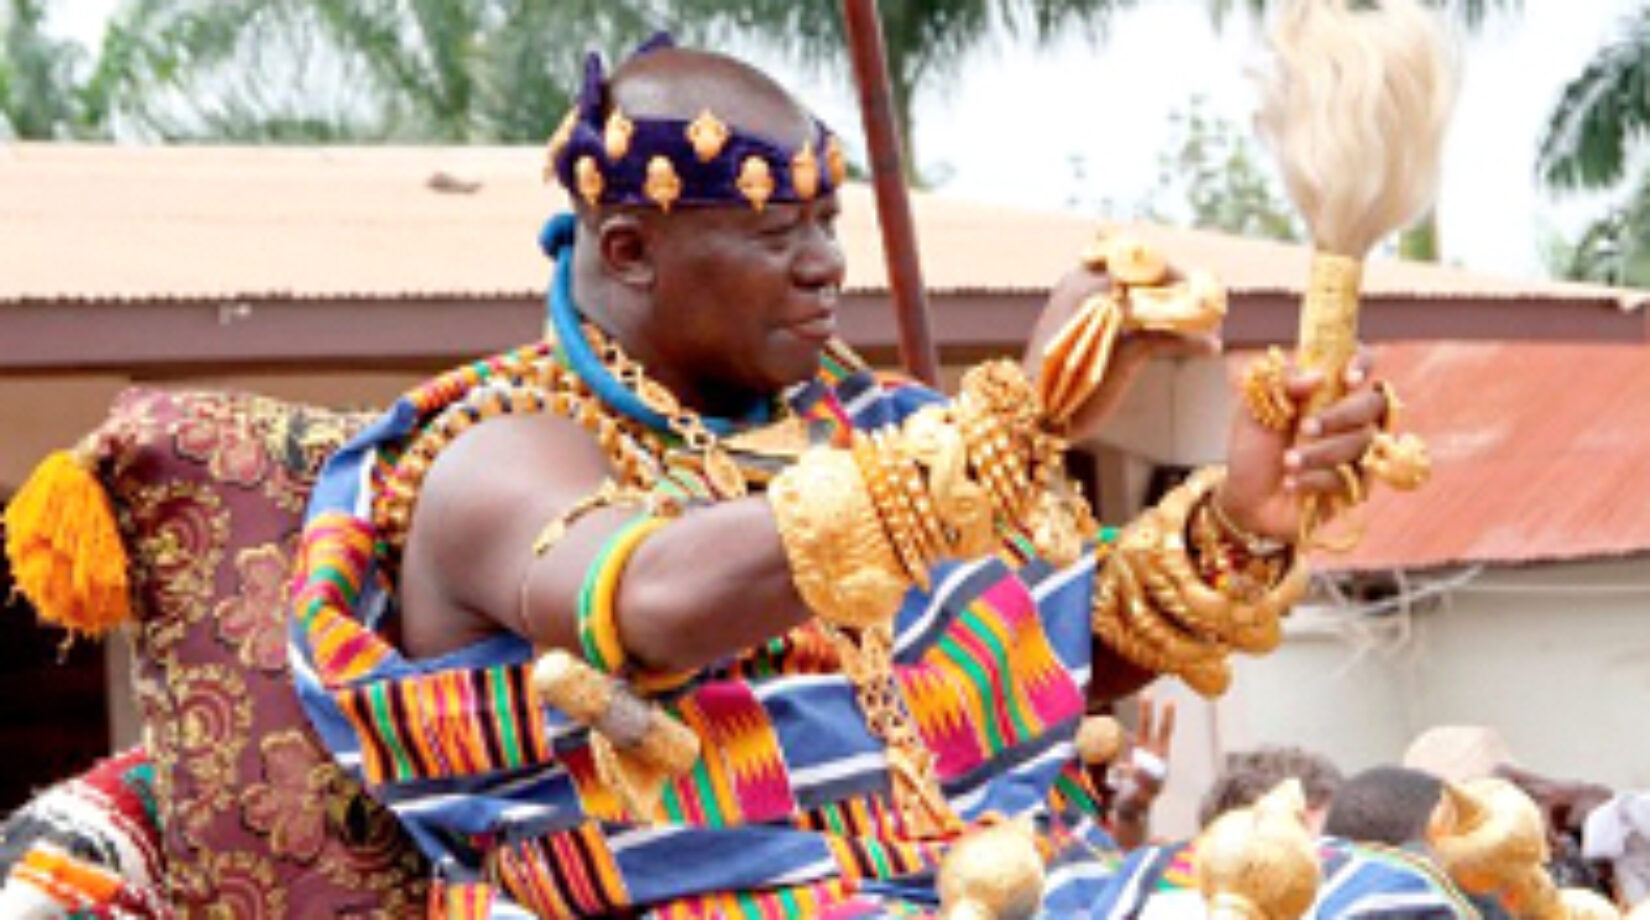 Official! ASANTEHENE  AND WIFE TO ATTEND CORONATION OF KING CHARLES III